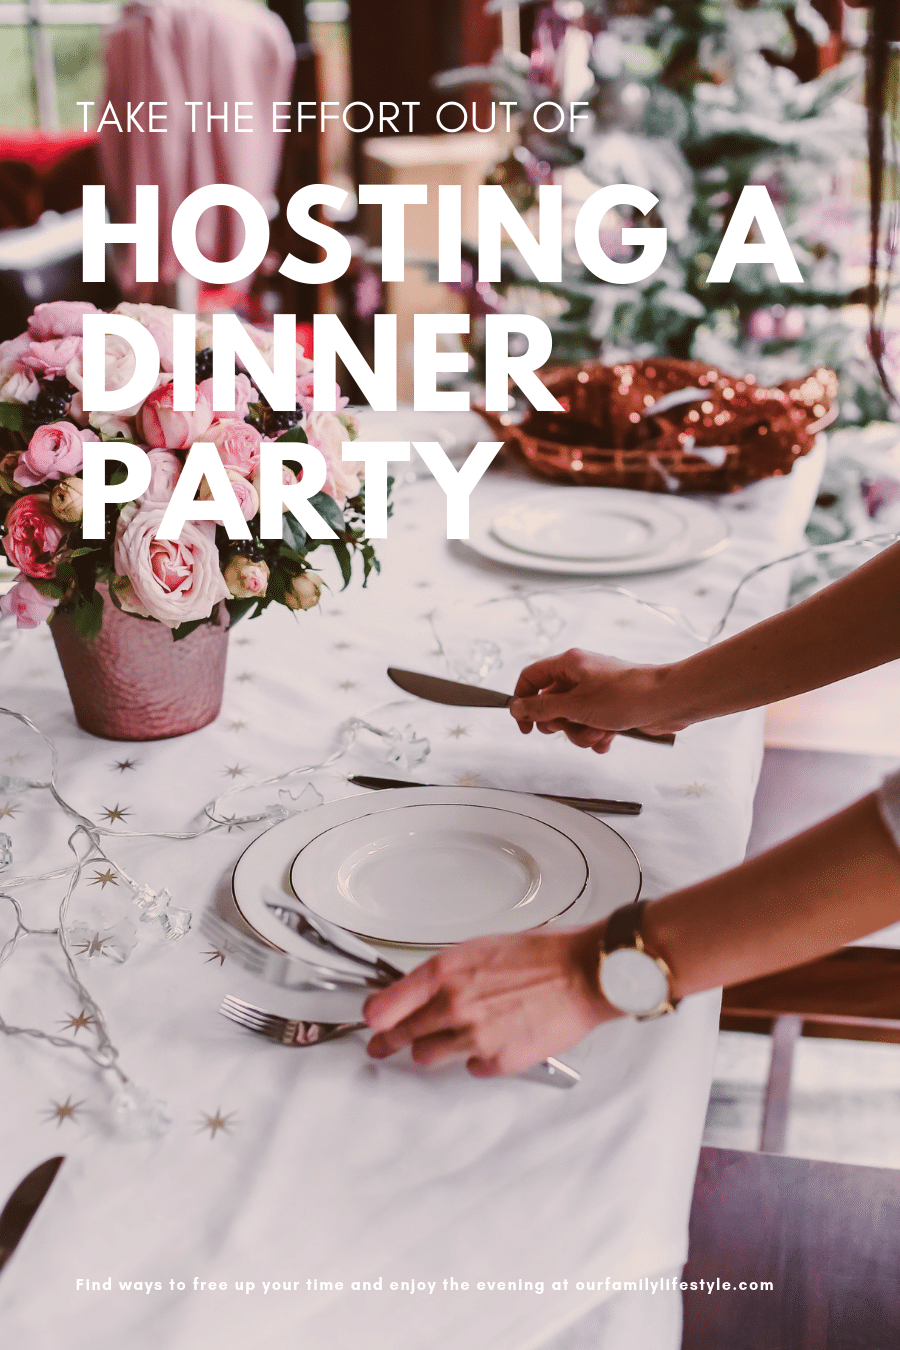 Take the Effort Out of Hosting a Dinner Party